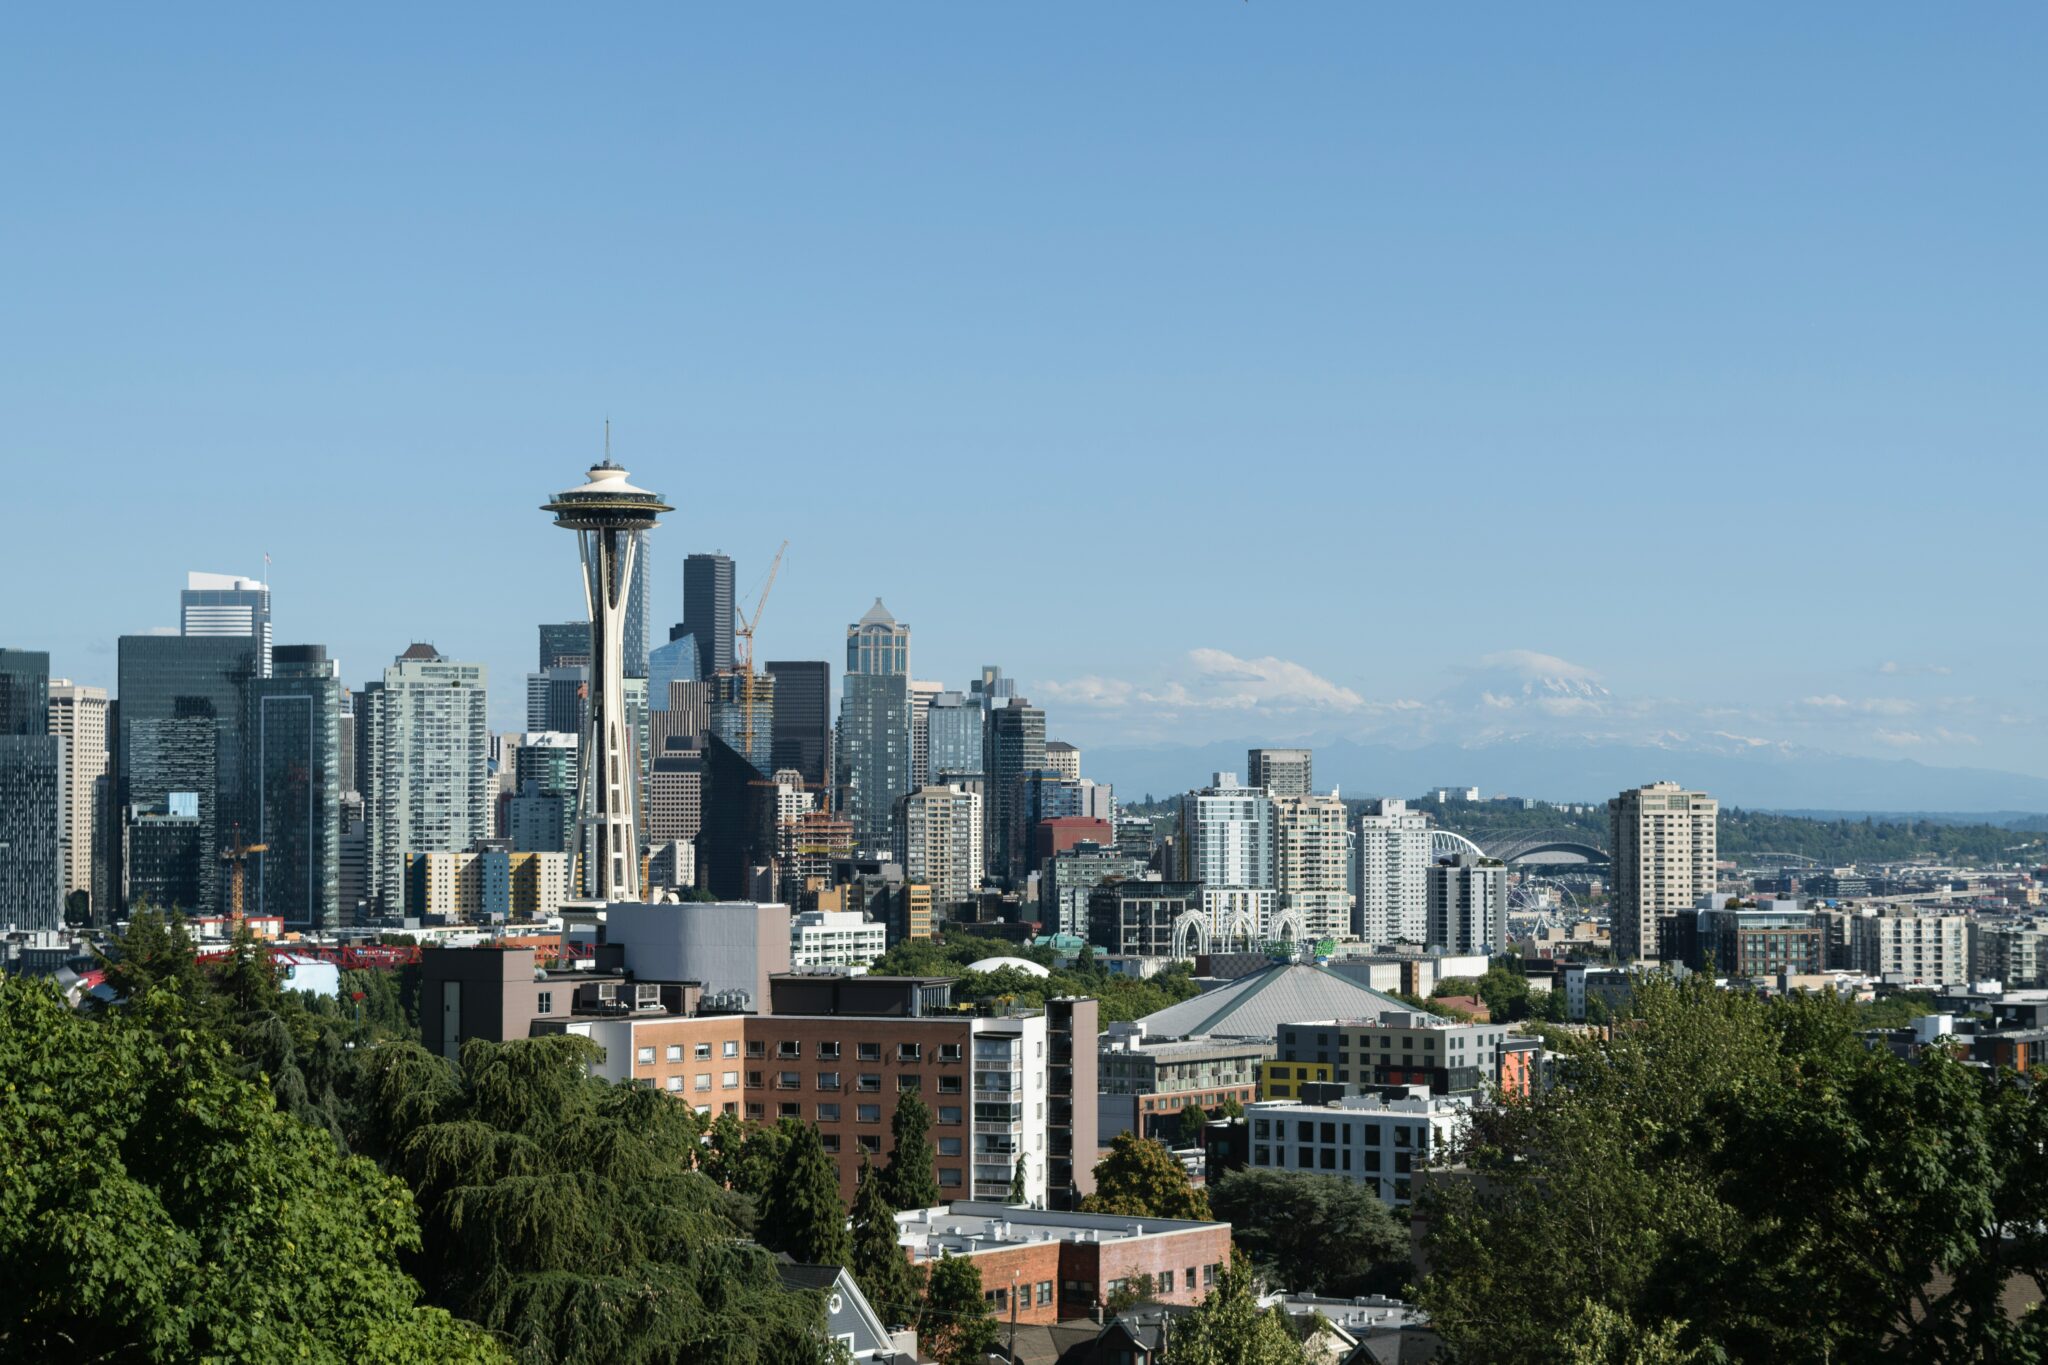 Kerry Park Seattle | Best picnic areas in Washington